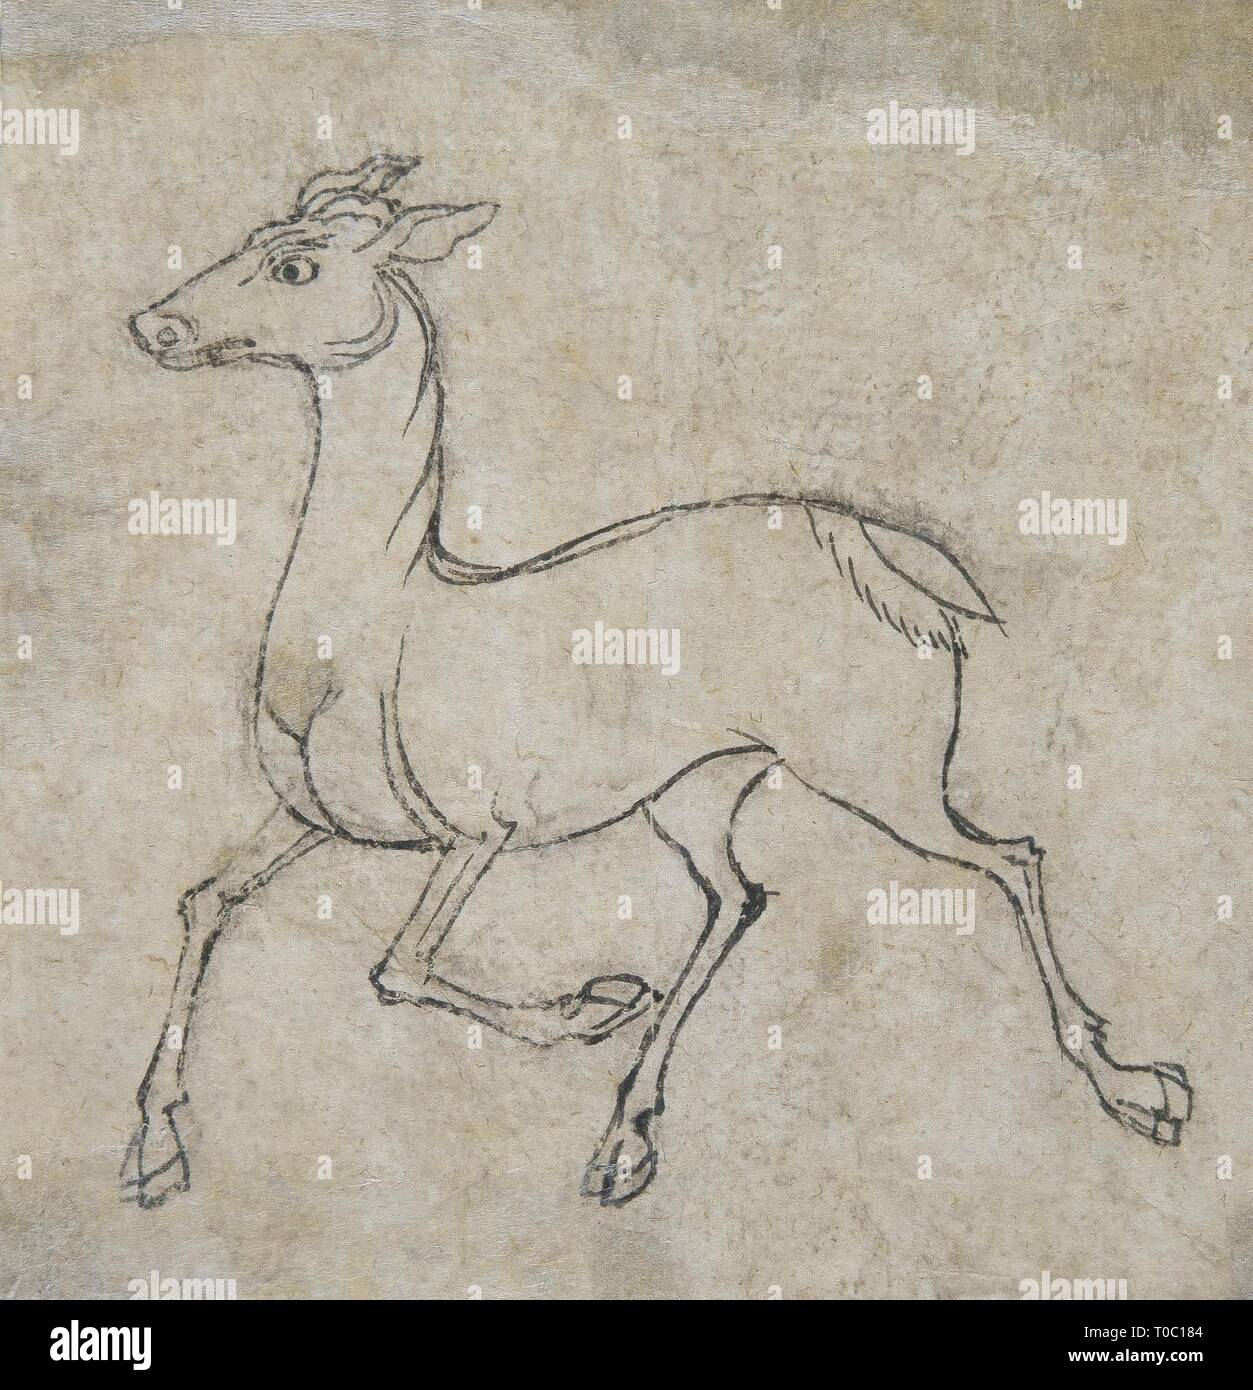 'Fallow Deer'. China, Tangut State of Xi -Xia, Khara-Khoto, 12th-14th century. Dimensions: 16x16 cm. Museum: State Hermitage, St. Petersburg. Stock Photo